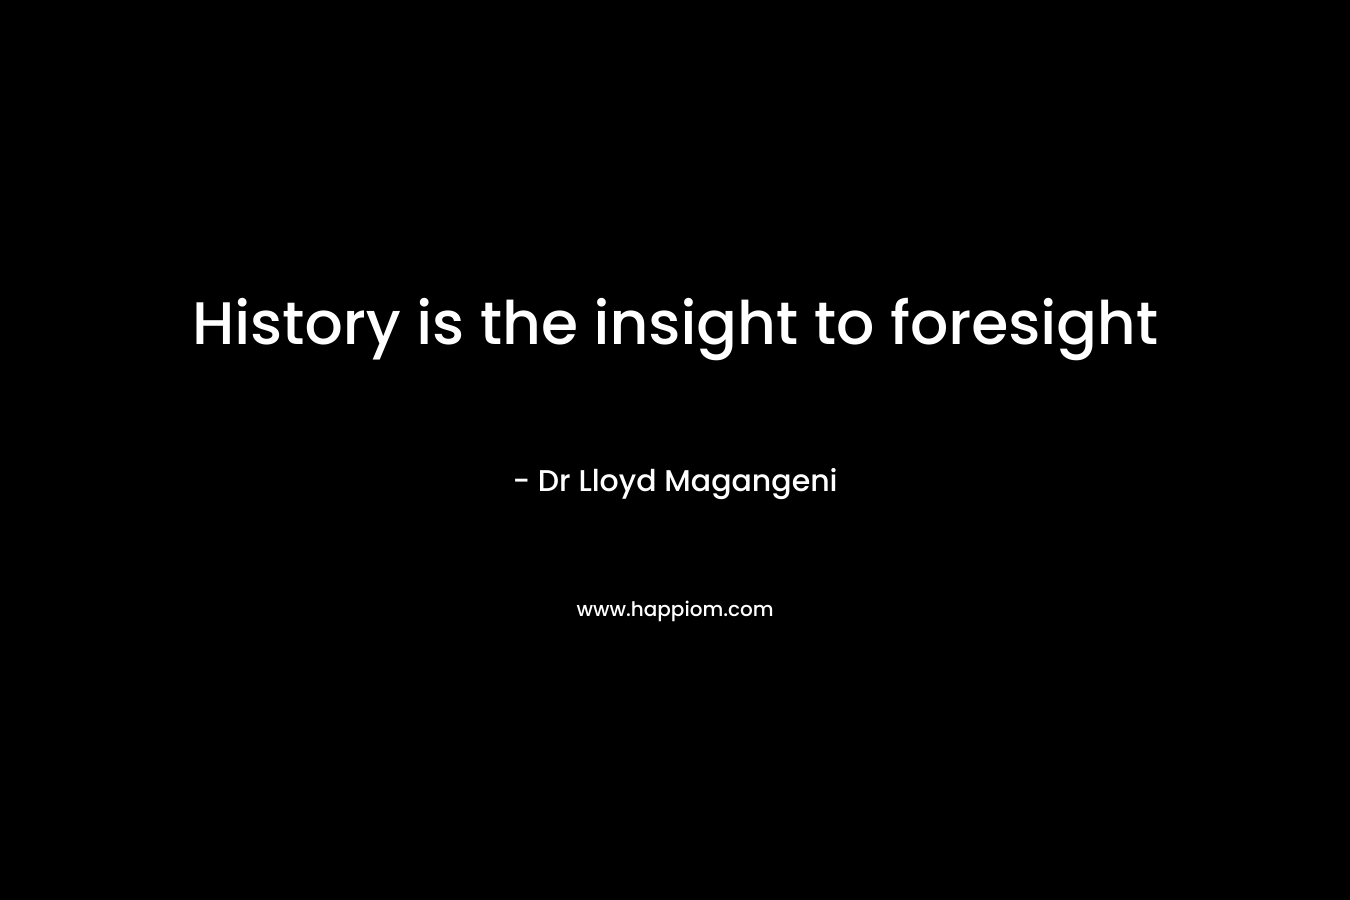 History is the insight to foresight